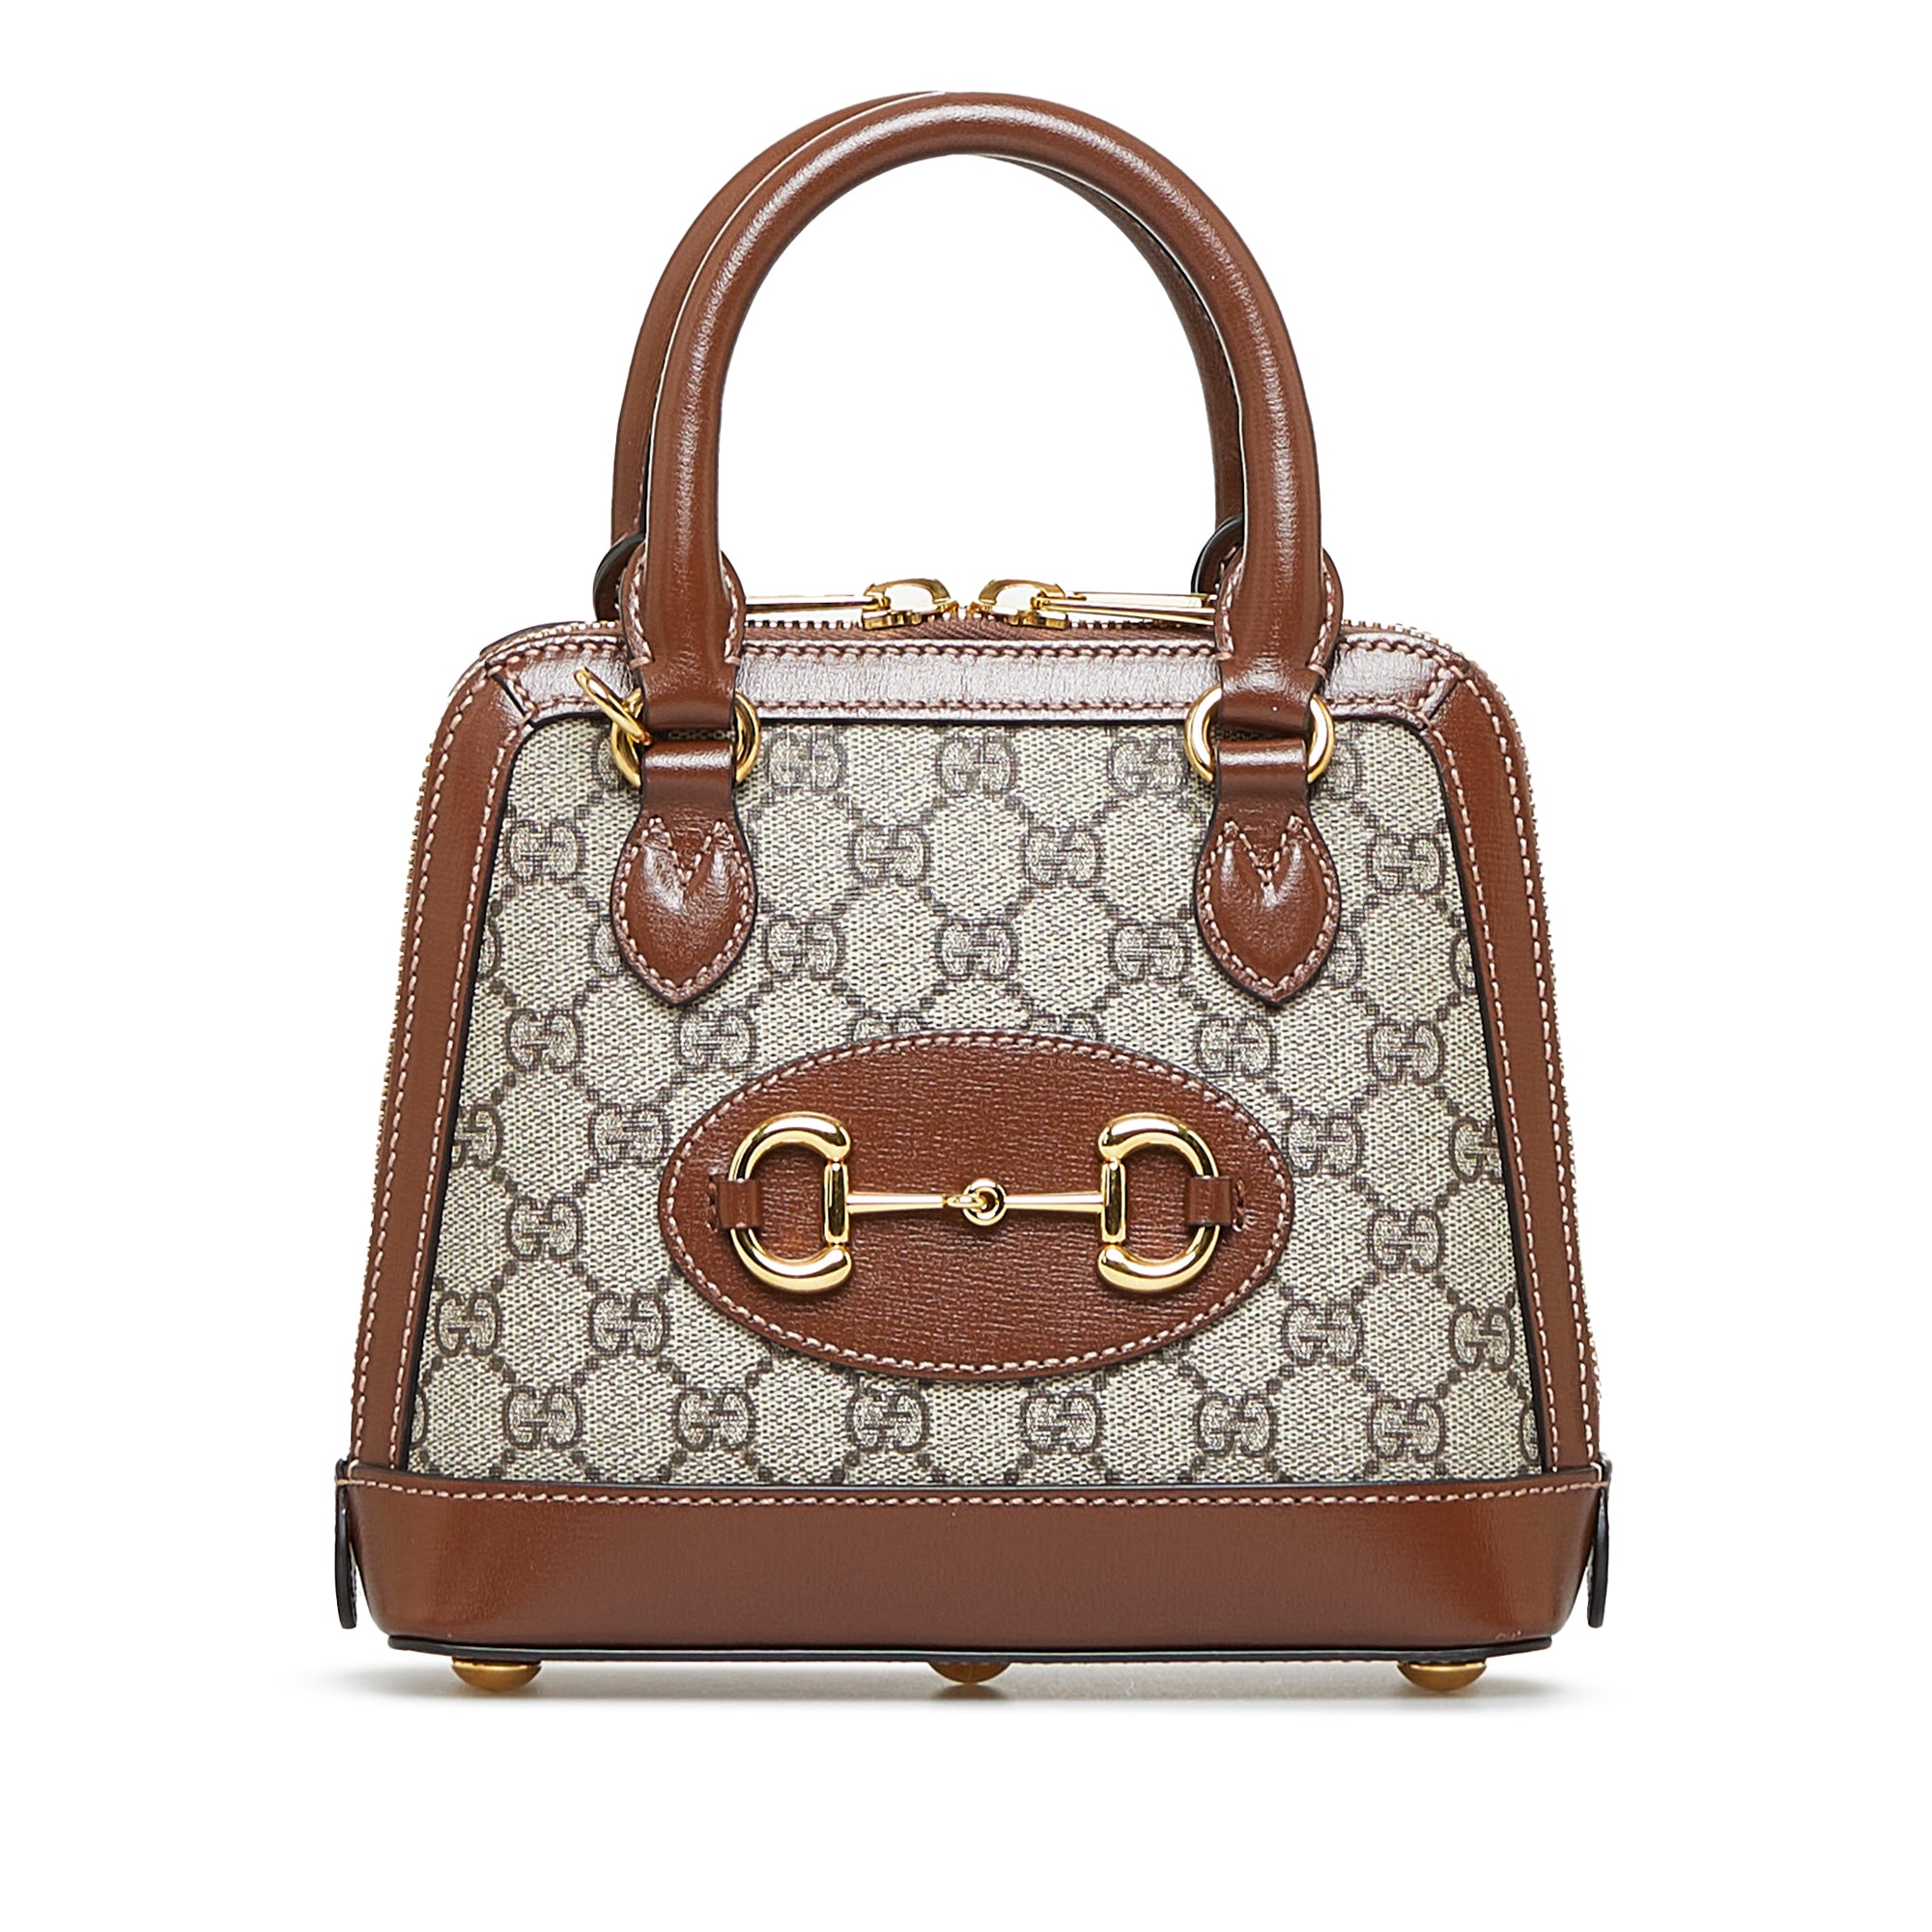 Gucci Horsebit 1955 mini rounded bag in brown leather